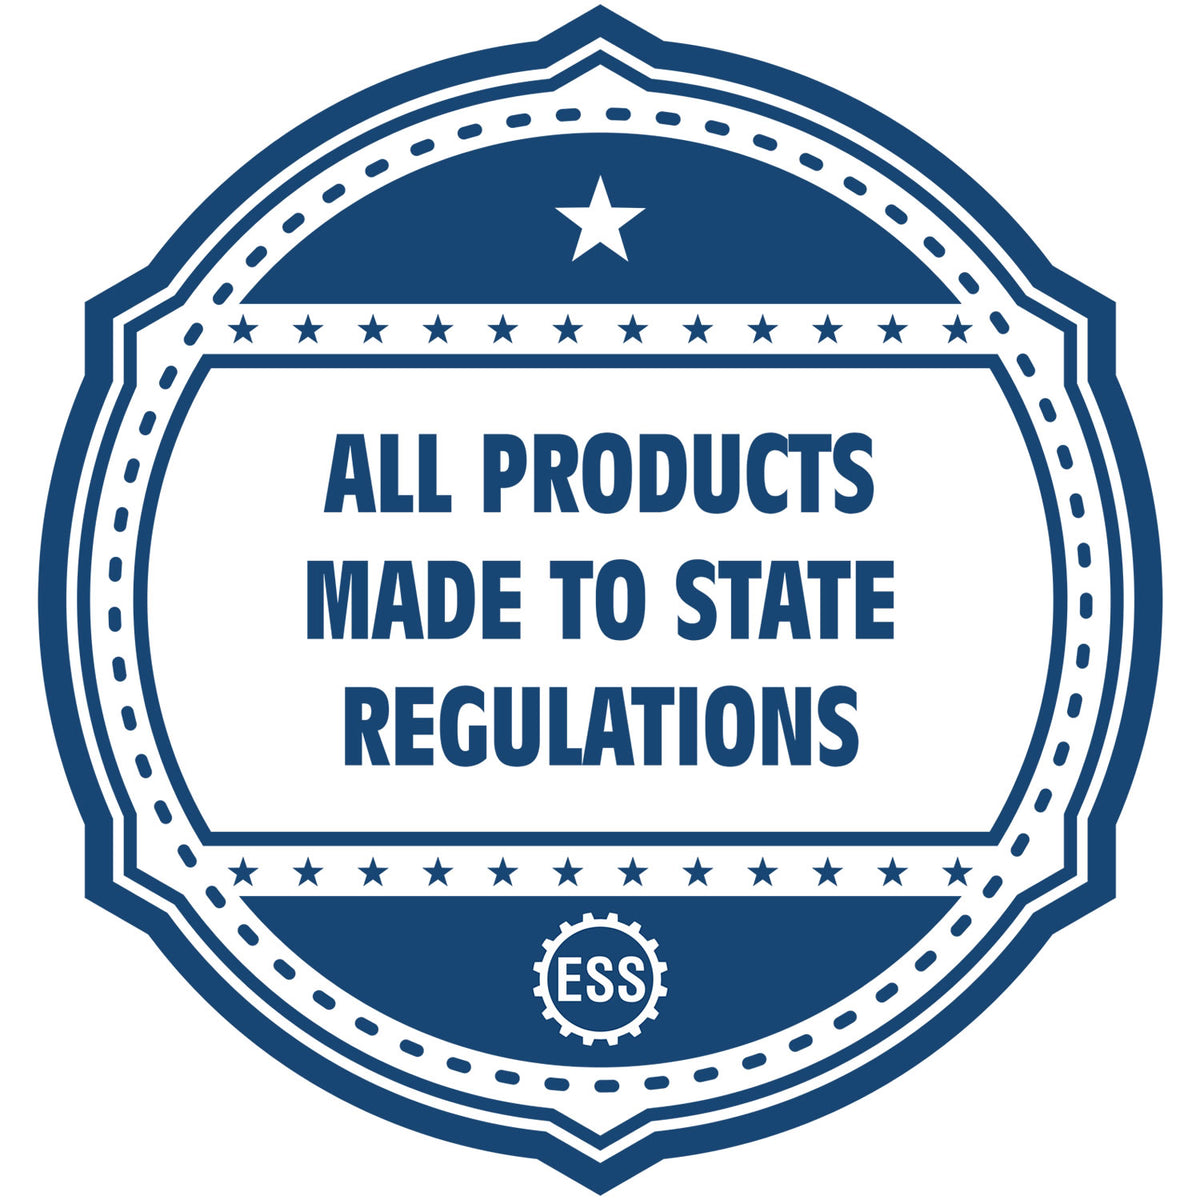 An icon or badge element for the Handheld Wyoming Architect Seal Embosser showing that this product is made in compliance with state regulations.